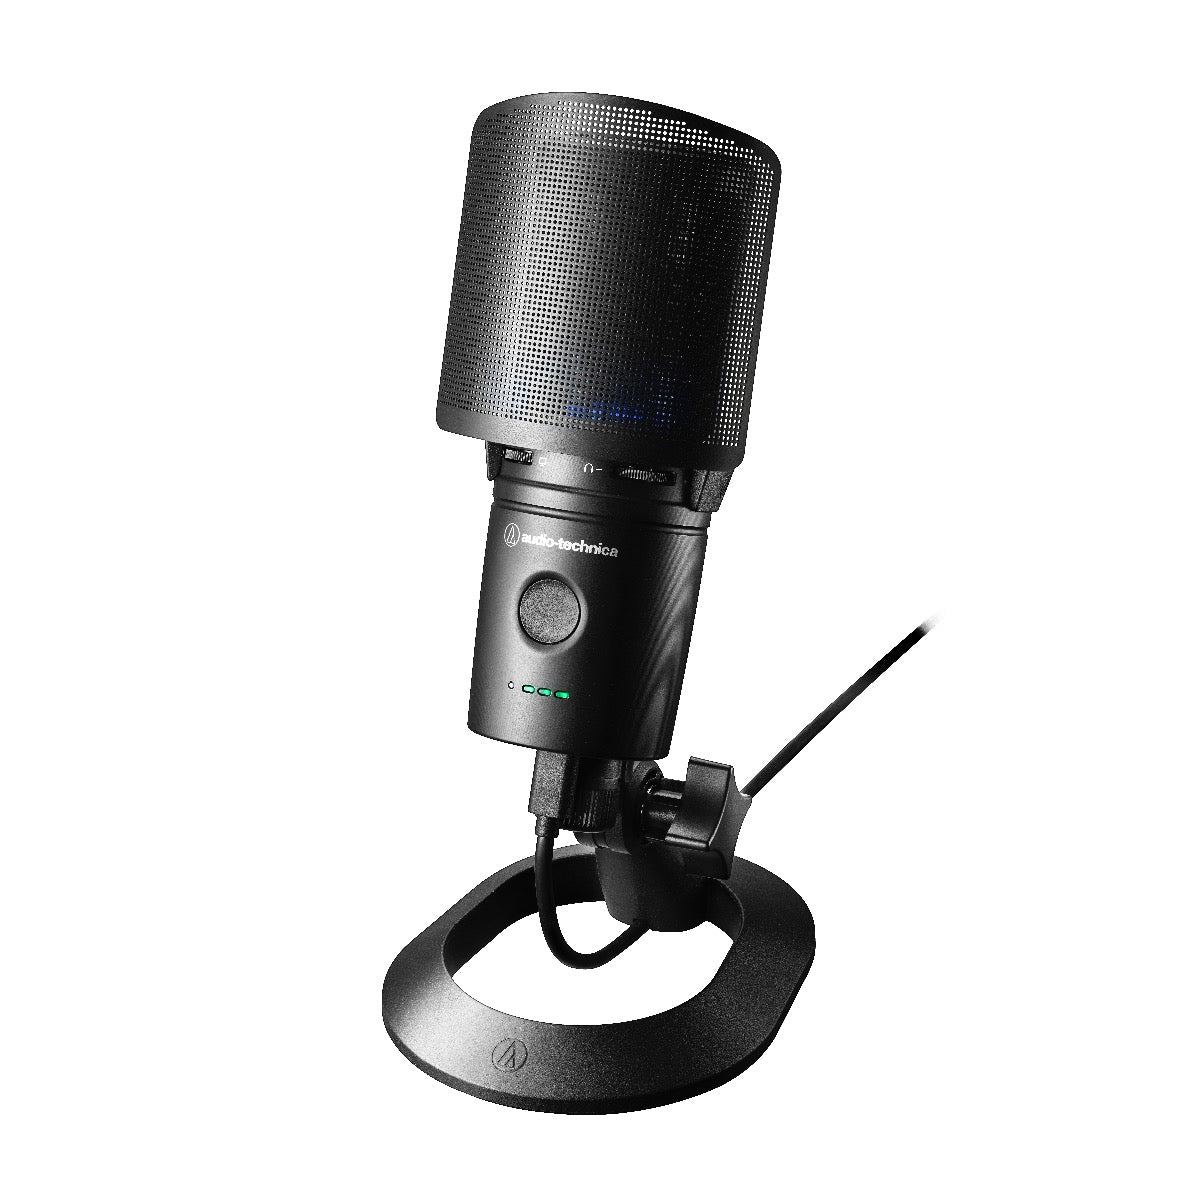 Audio Technica AT2020USBXP USB condenser mic with desktop stand, View 2